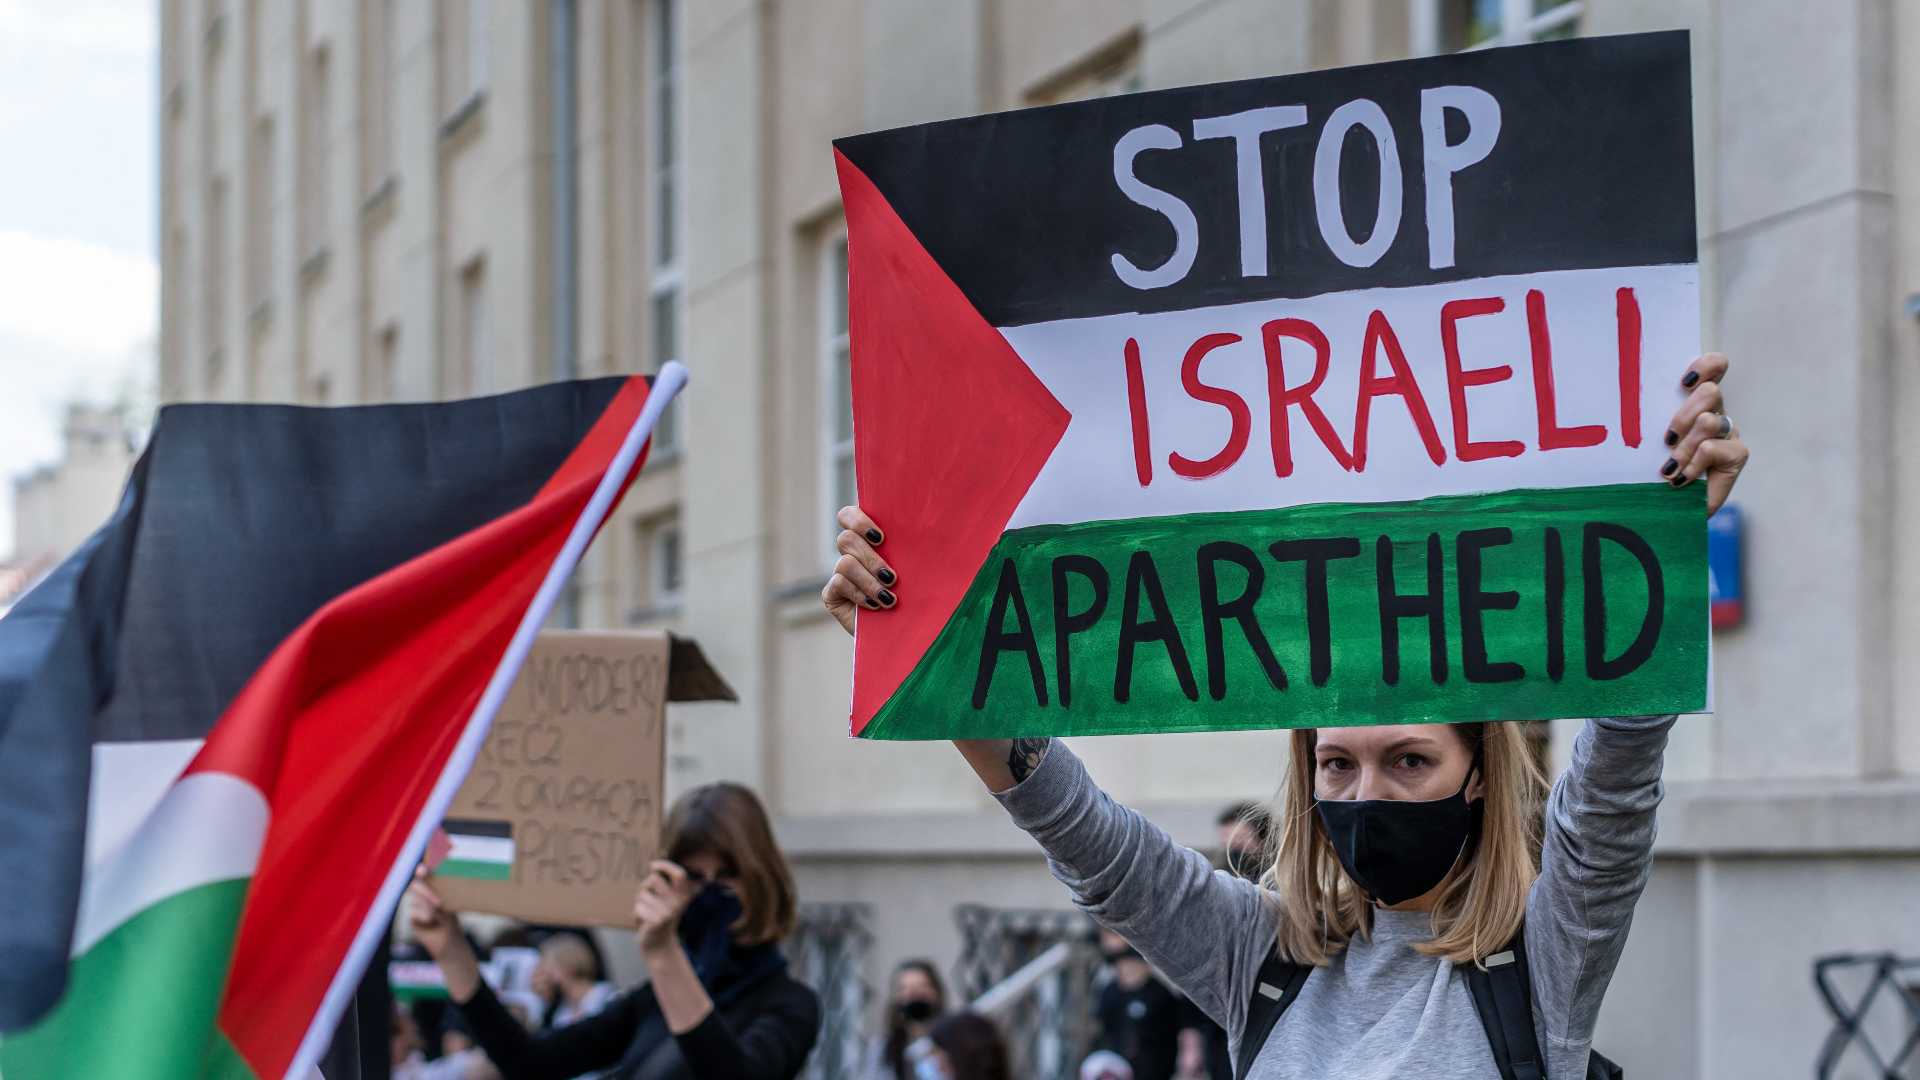  participant holds up a sign reading "Stop Israeli Apartheid" during a protest in solidarity with the Palestinians called over the ongoing conflict with Israel in front of the Israeli embassy in Warsaw, May 15, 2021.